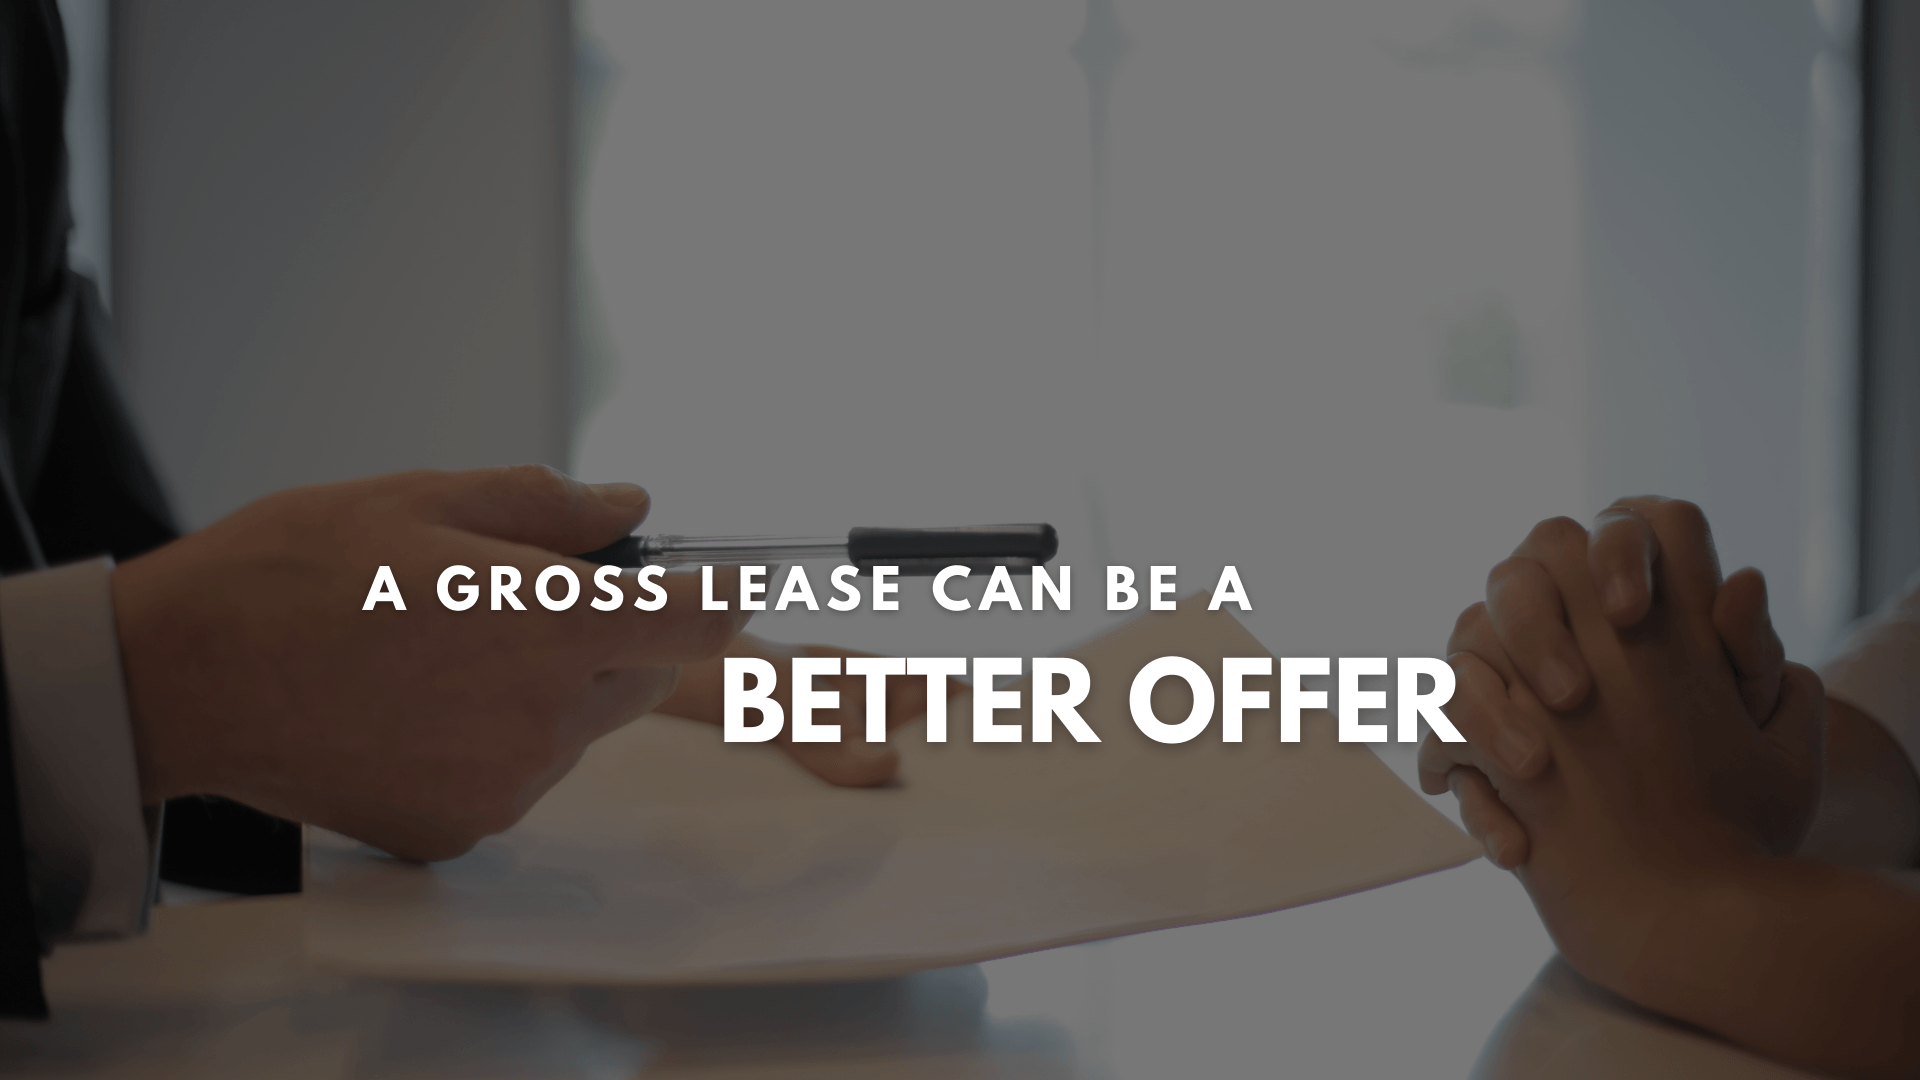 Benefits of a Gross Lease